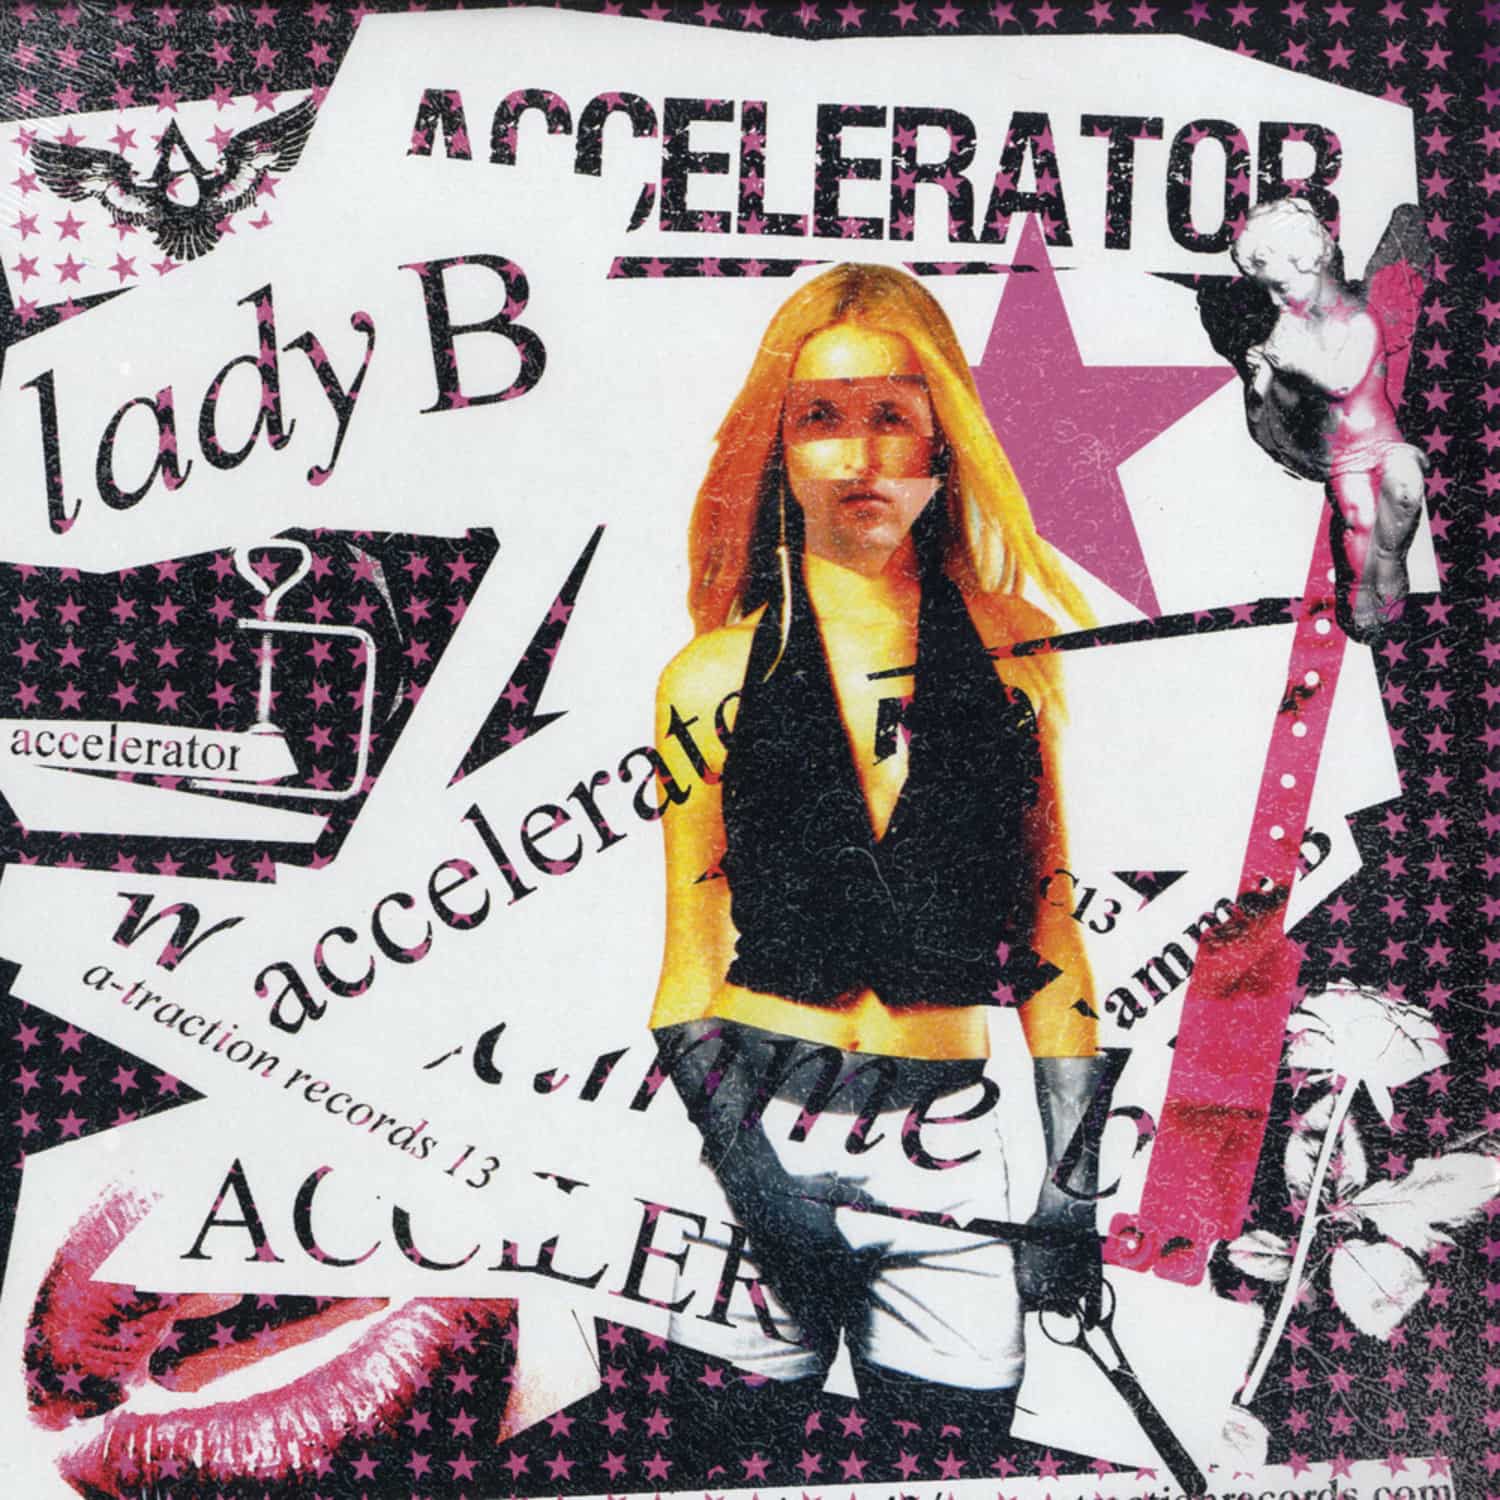 Lady B feat. Thee Acid Bitches - ACCELTERATOR EP